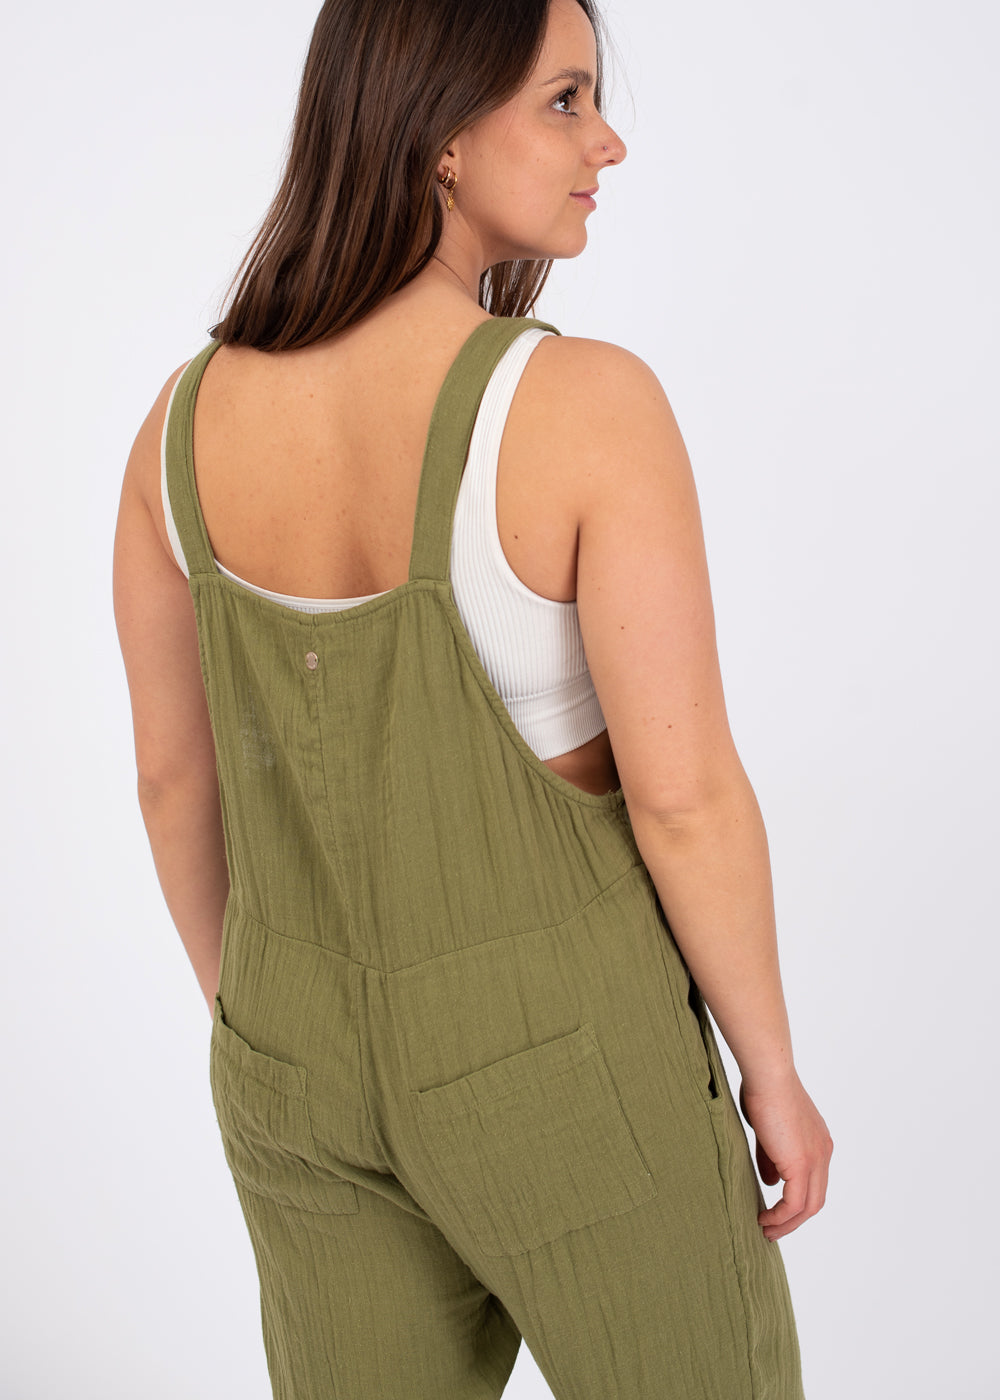 Load image into Gallery viewer, Beachside Love Khaki Dungarees by Roxy
